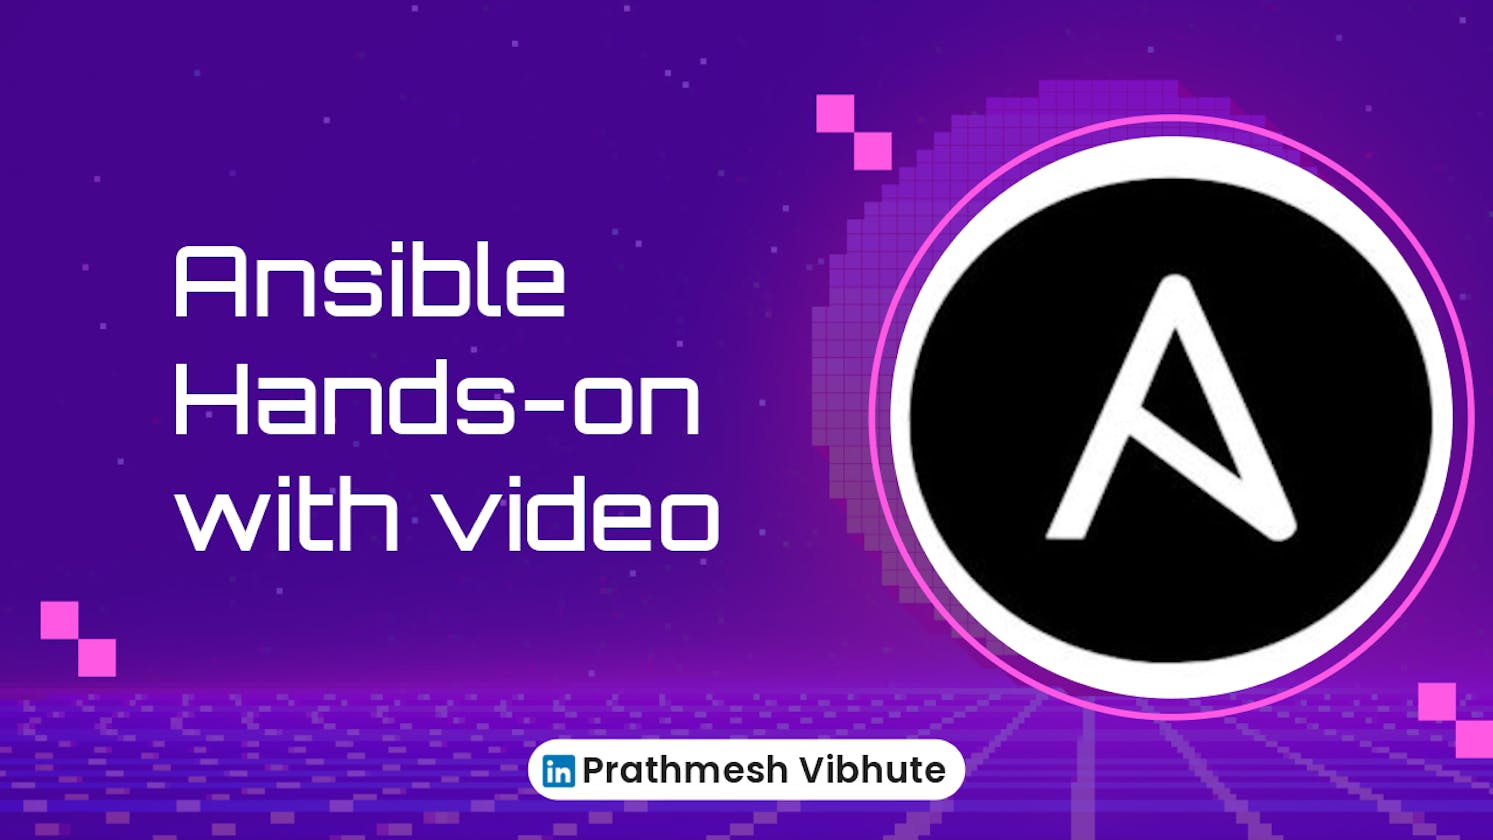 Day 57 : Ansible Hands-on with video